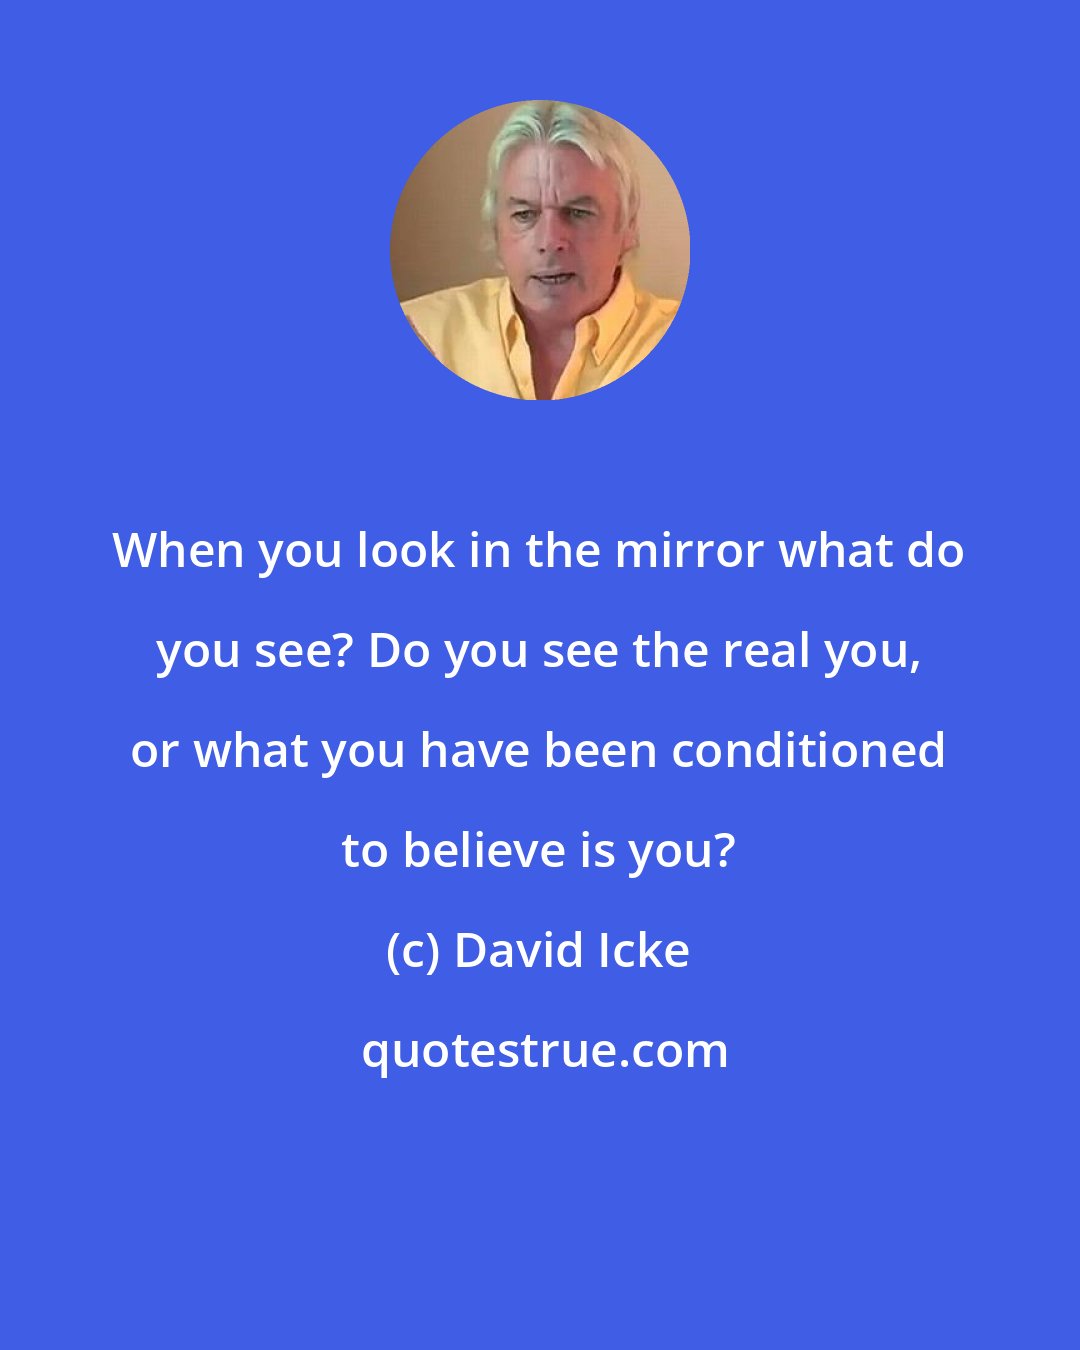 David Icke: When you look in the mirror what do you see? Do you see the real you, or what you have been conditioned to believe is you?